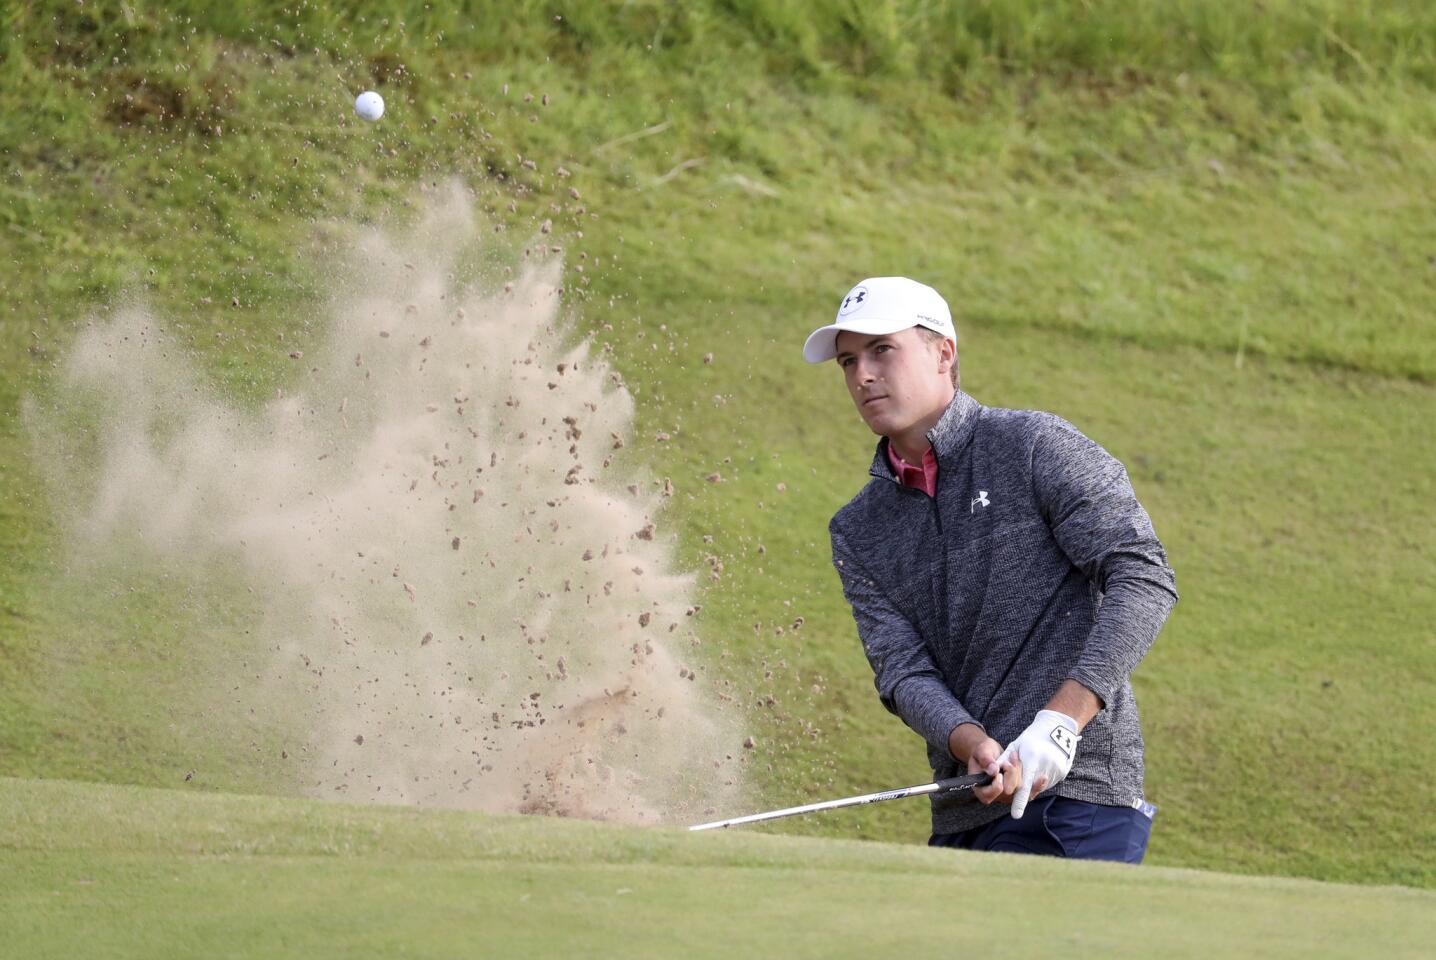 Jordan Spieth plays out of a bunker on the 17th hole during the third round of the British Open Golf Championship, at Royal Birkdale.